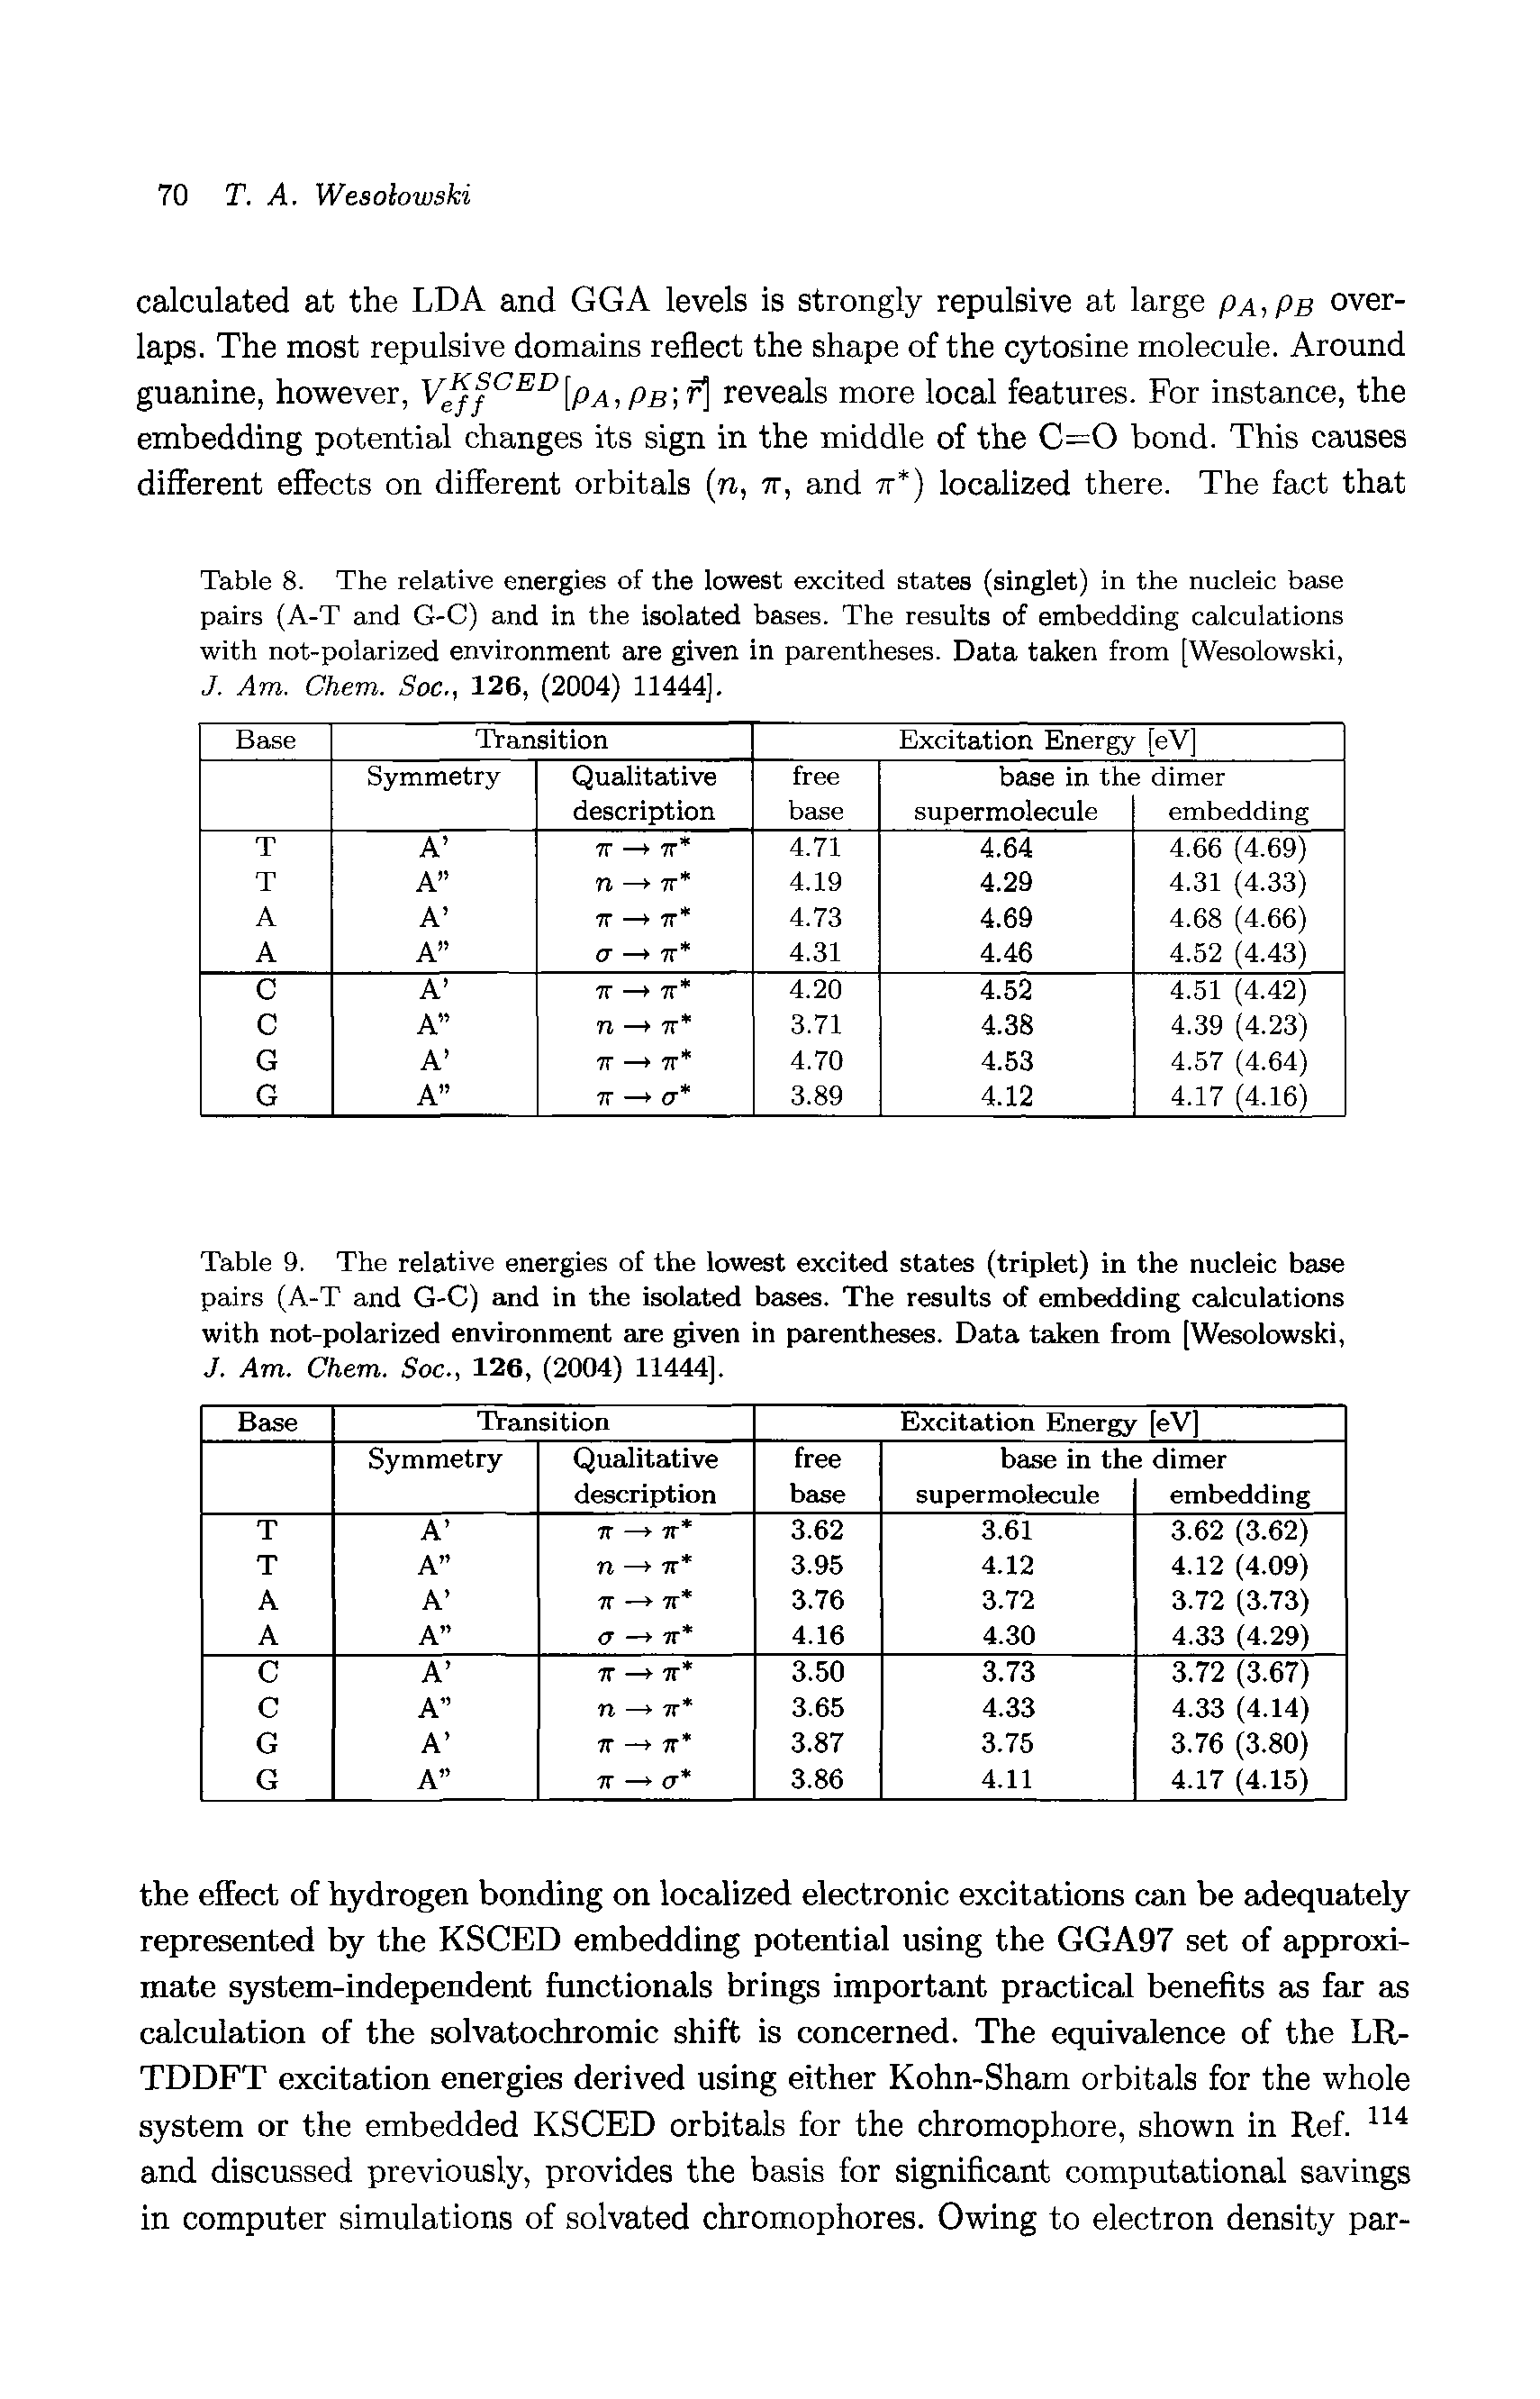 Table 8. The relative energies of the lowest excited states (singlet) in the nucleic base pairs (A-T and G-C) and in the isolated bases. The results of embedding calculations with not-polarized environment are given in parentheses. Data taken from [Wesolowski, J. Am. Chem. Soc., 126, (2004) 11444].